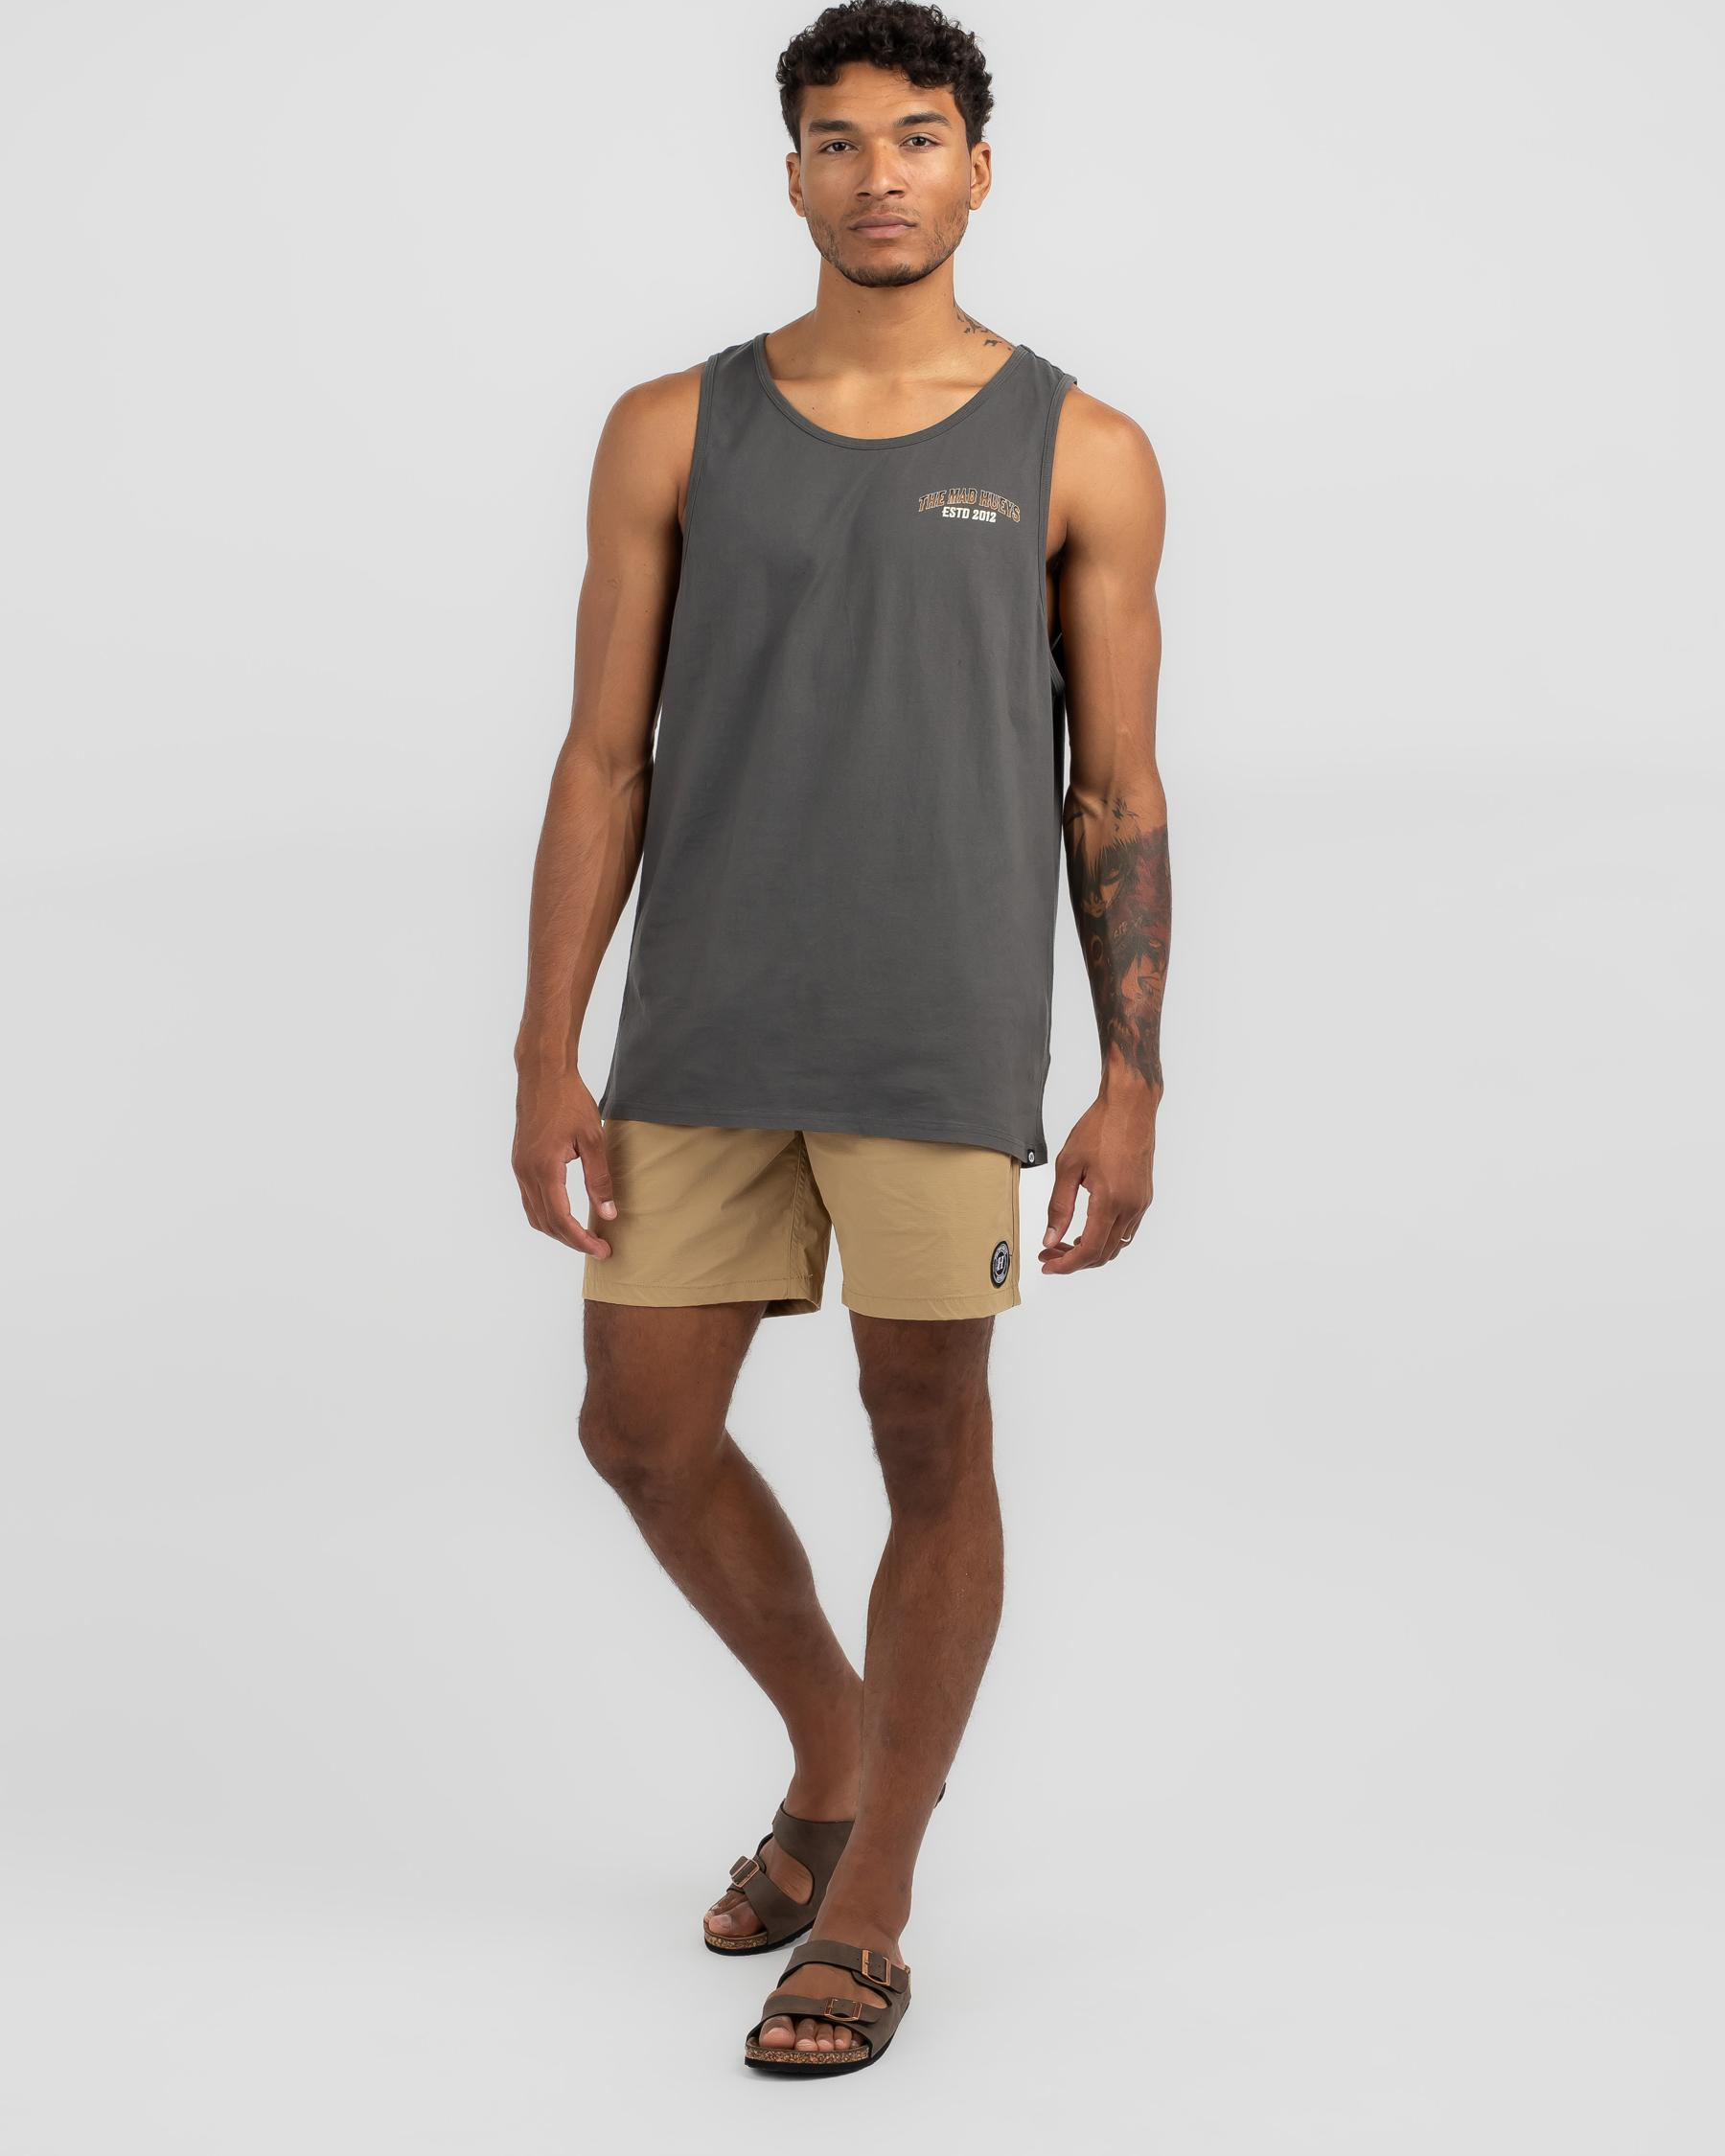 The Mad Hueys Full Throttle Singlet In Charcoal - Fast Shipping & Easy ...